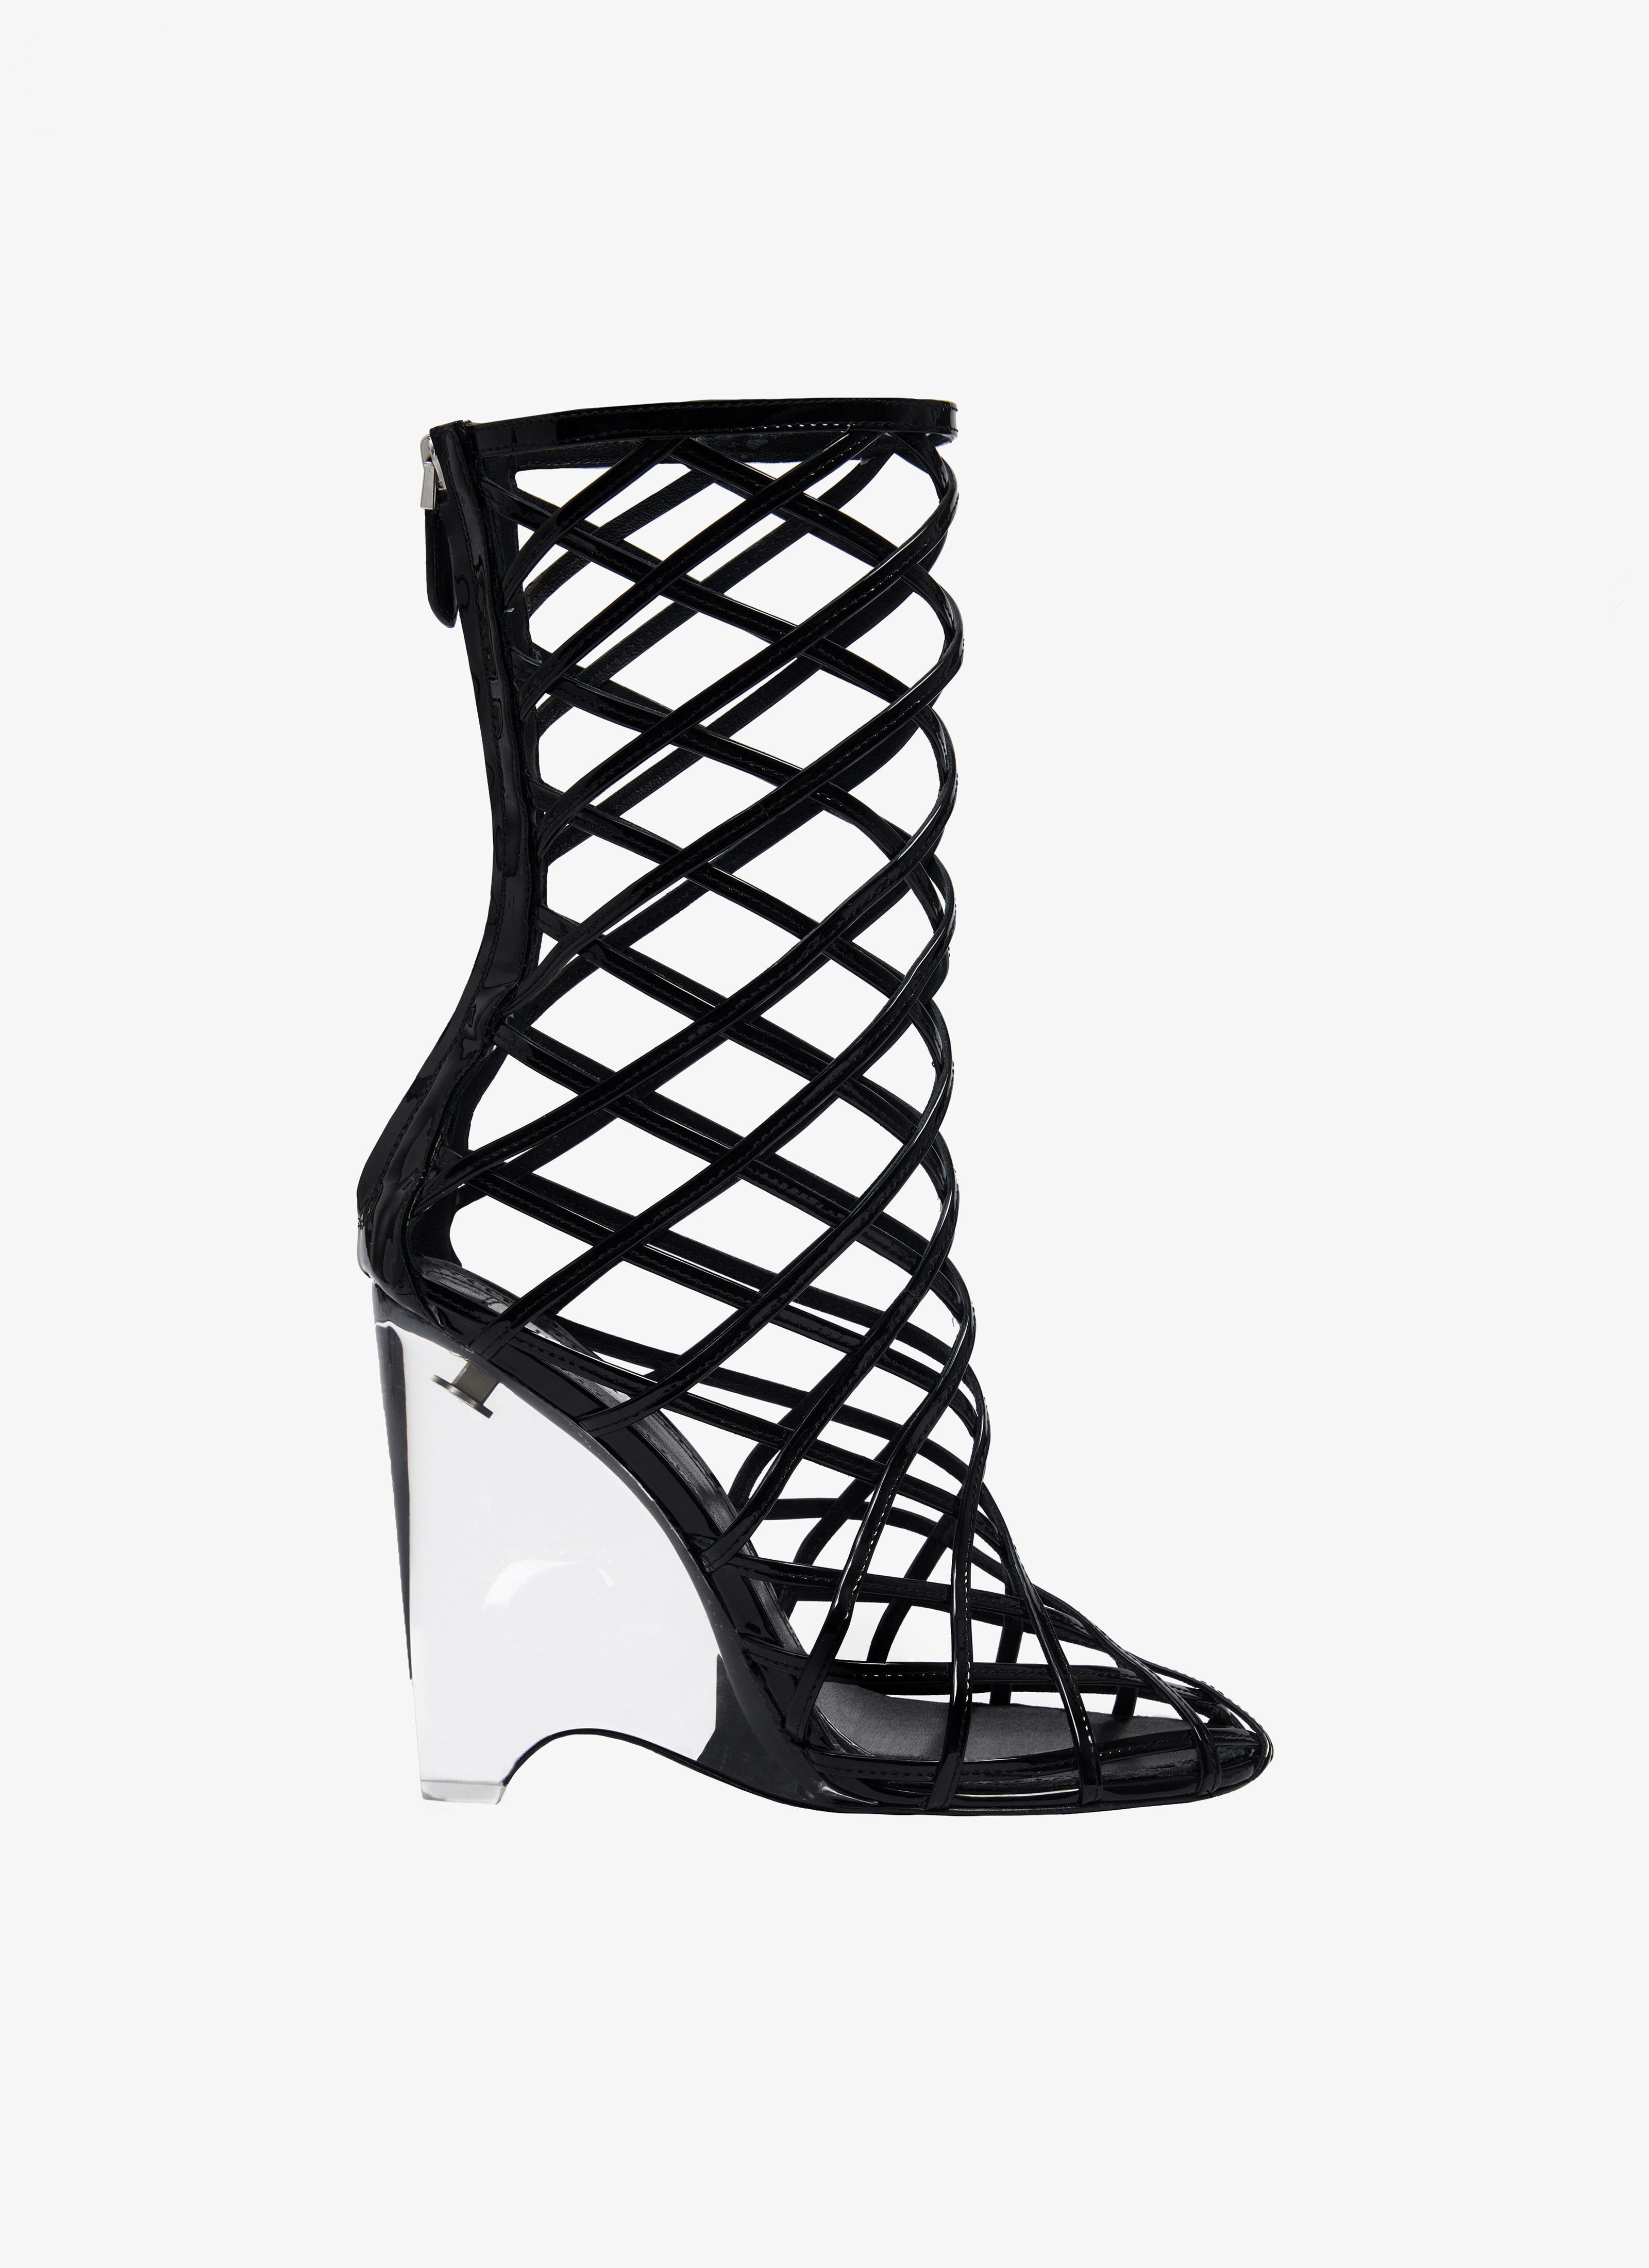 LA CAGE WEDGE BOOTIES IN PATENT LAMBSKIN - 1